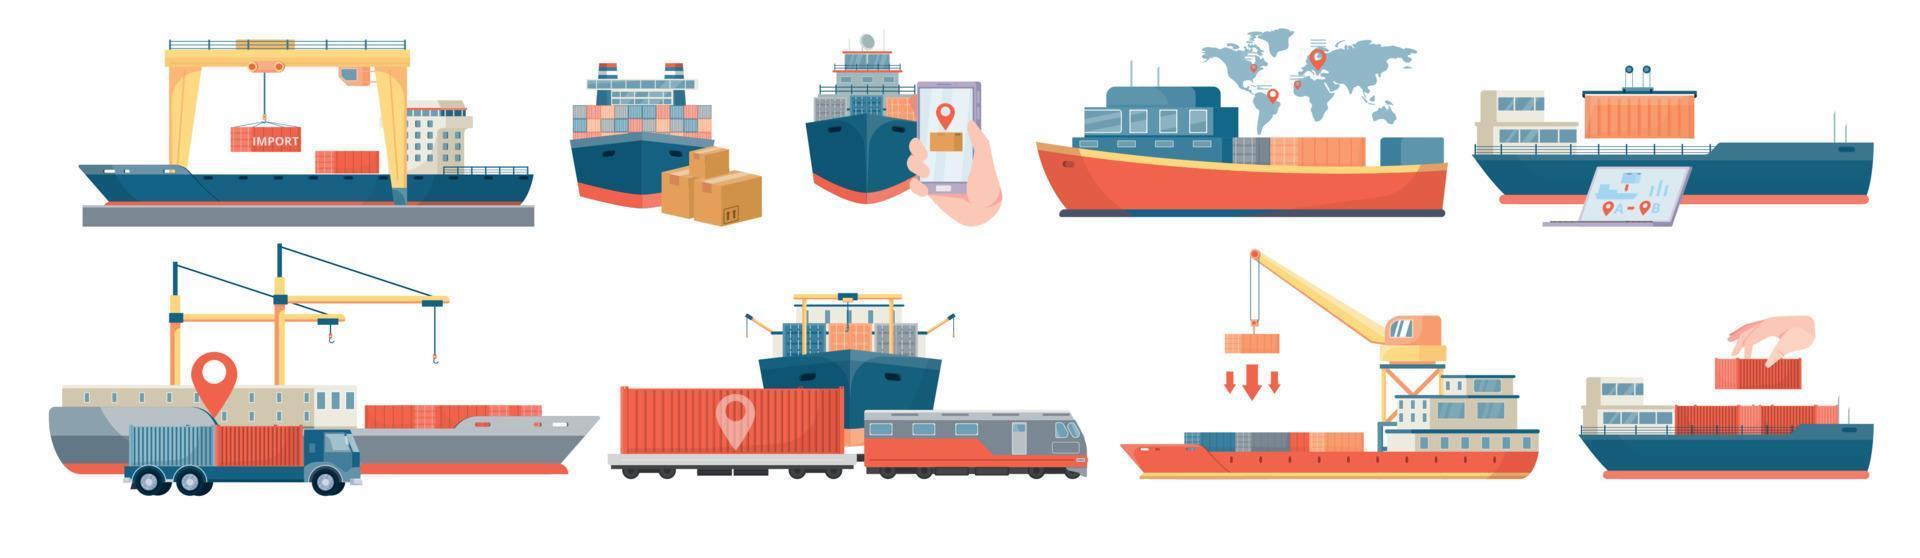 Sea Delivery Vehicles Composition vector